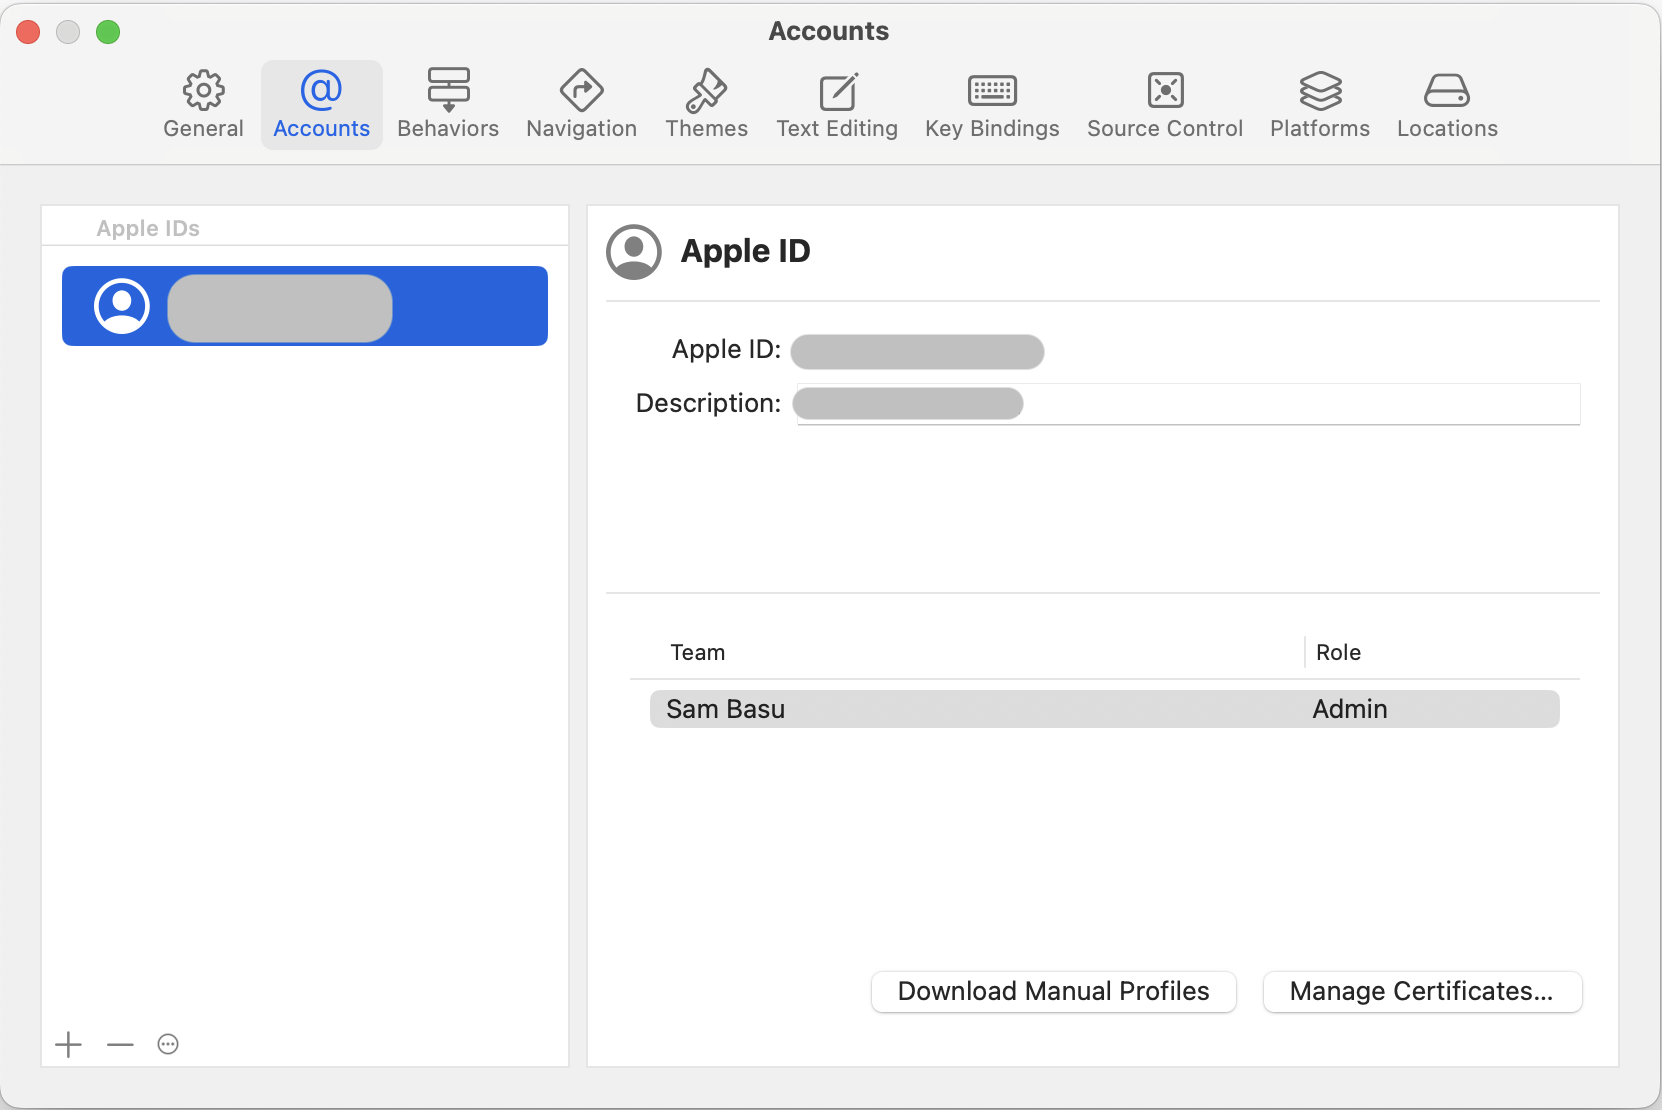 Accounts - Apple ID with buttons for download manual profiles and manage Certificates